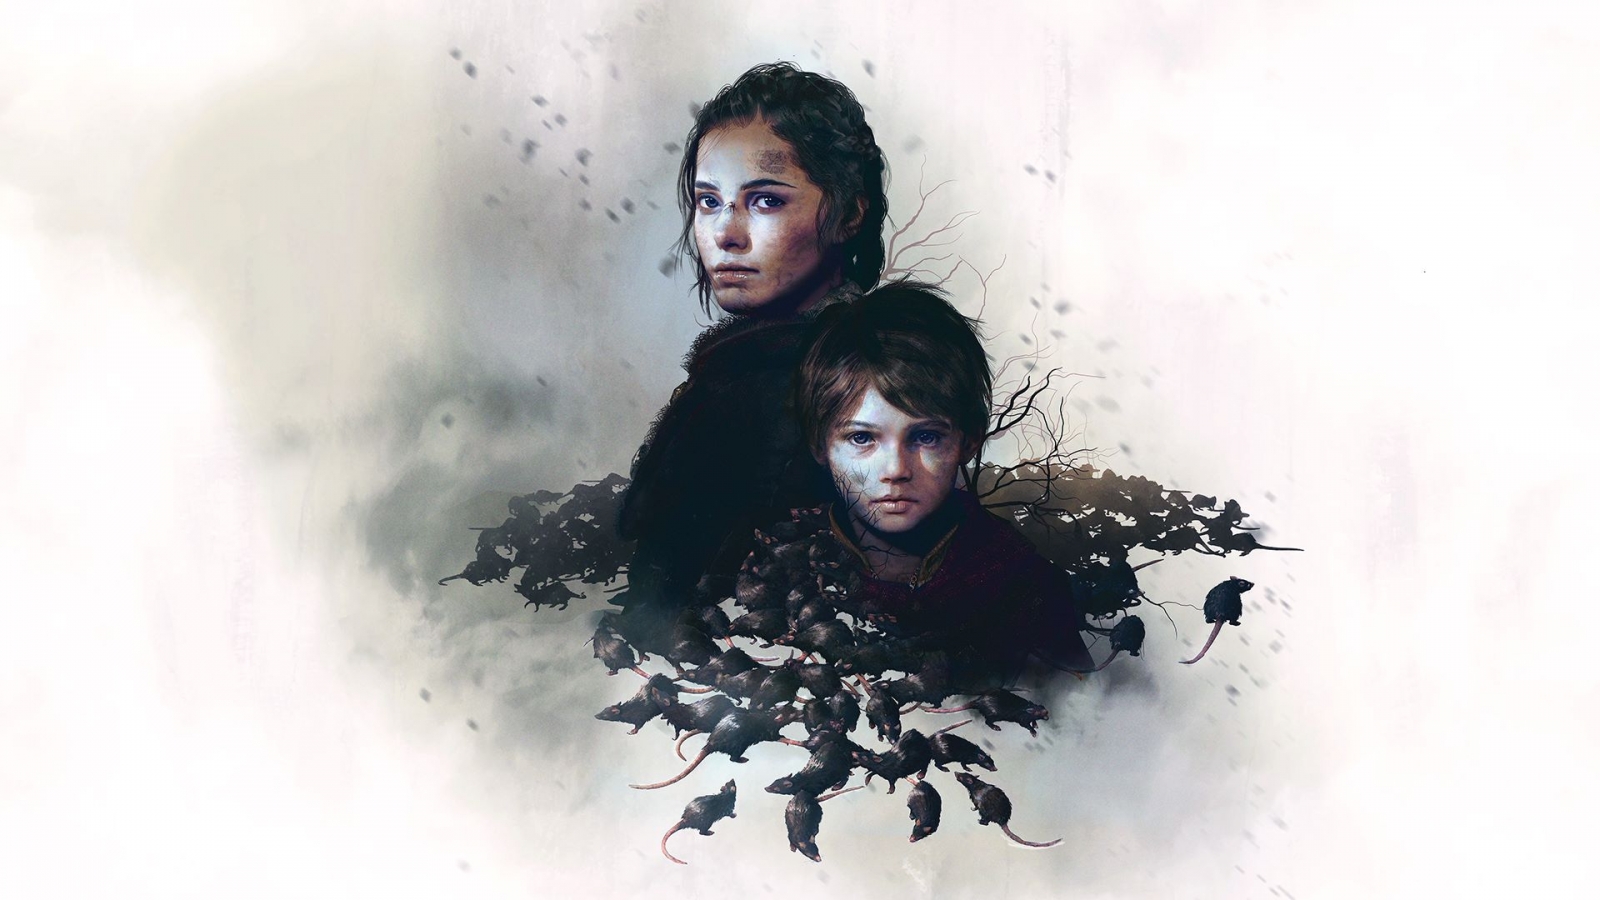 How long is A Plague Tale: Requiem? Full chapter list and story length